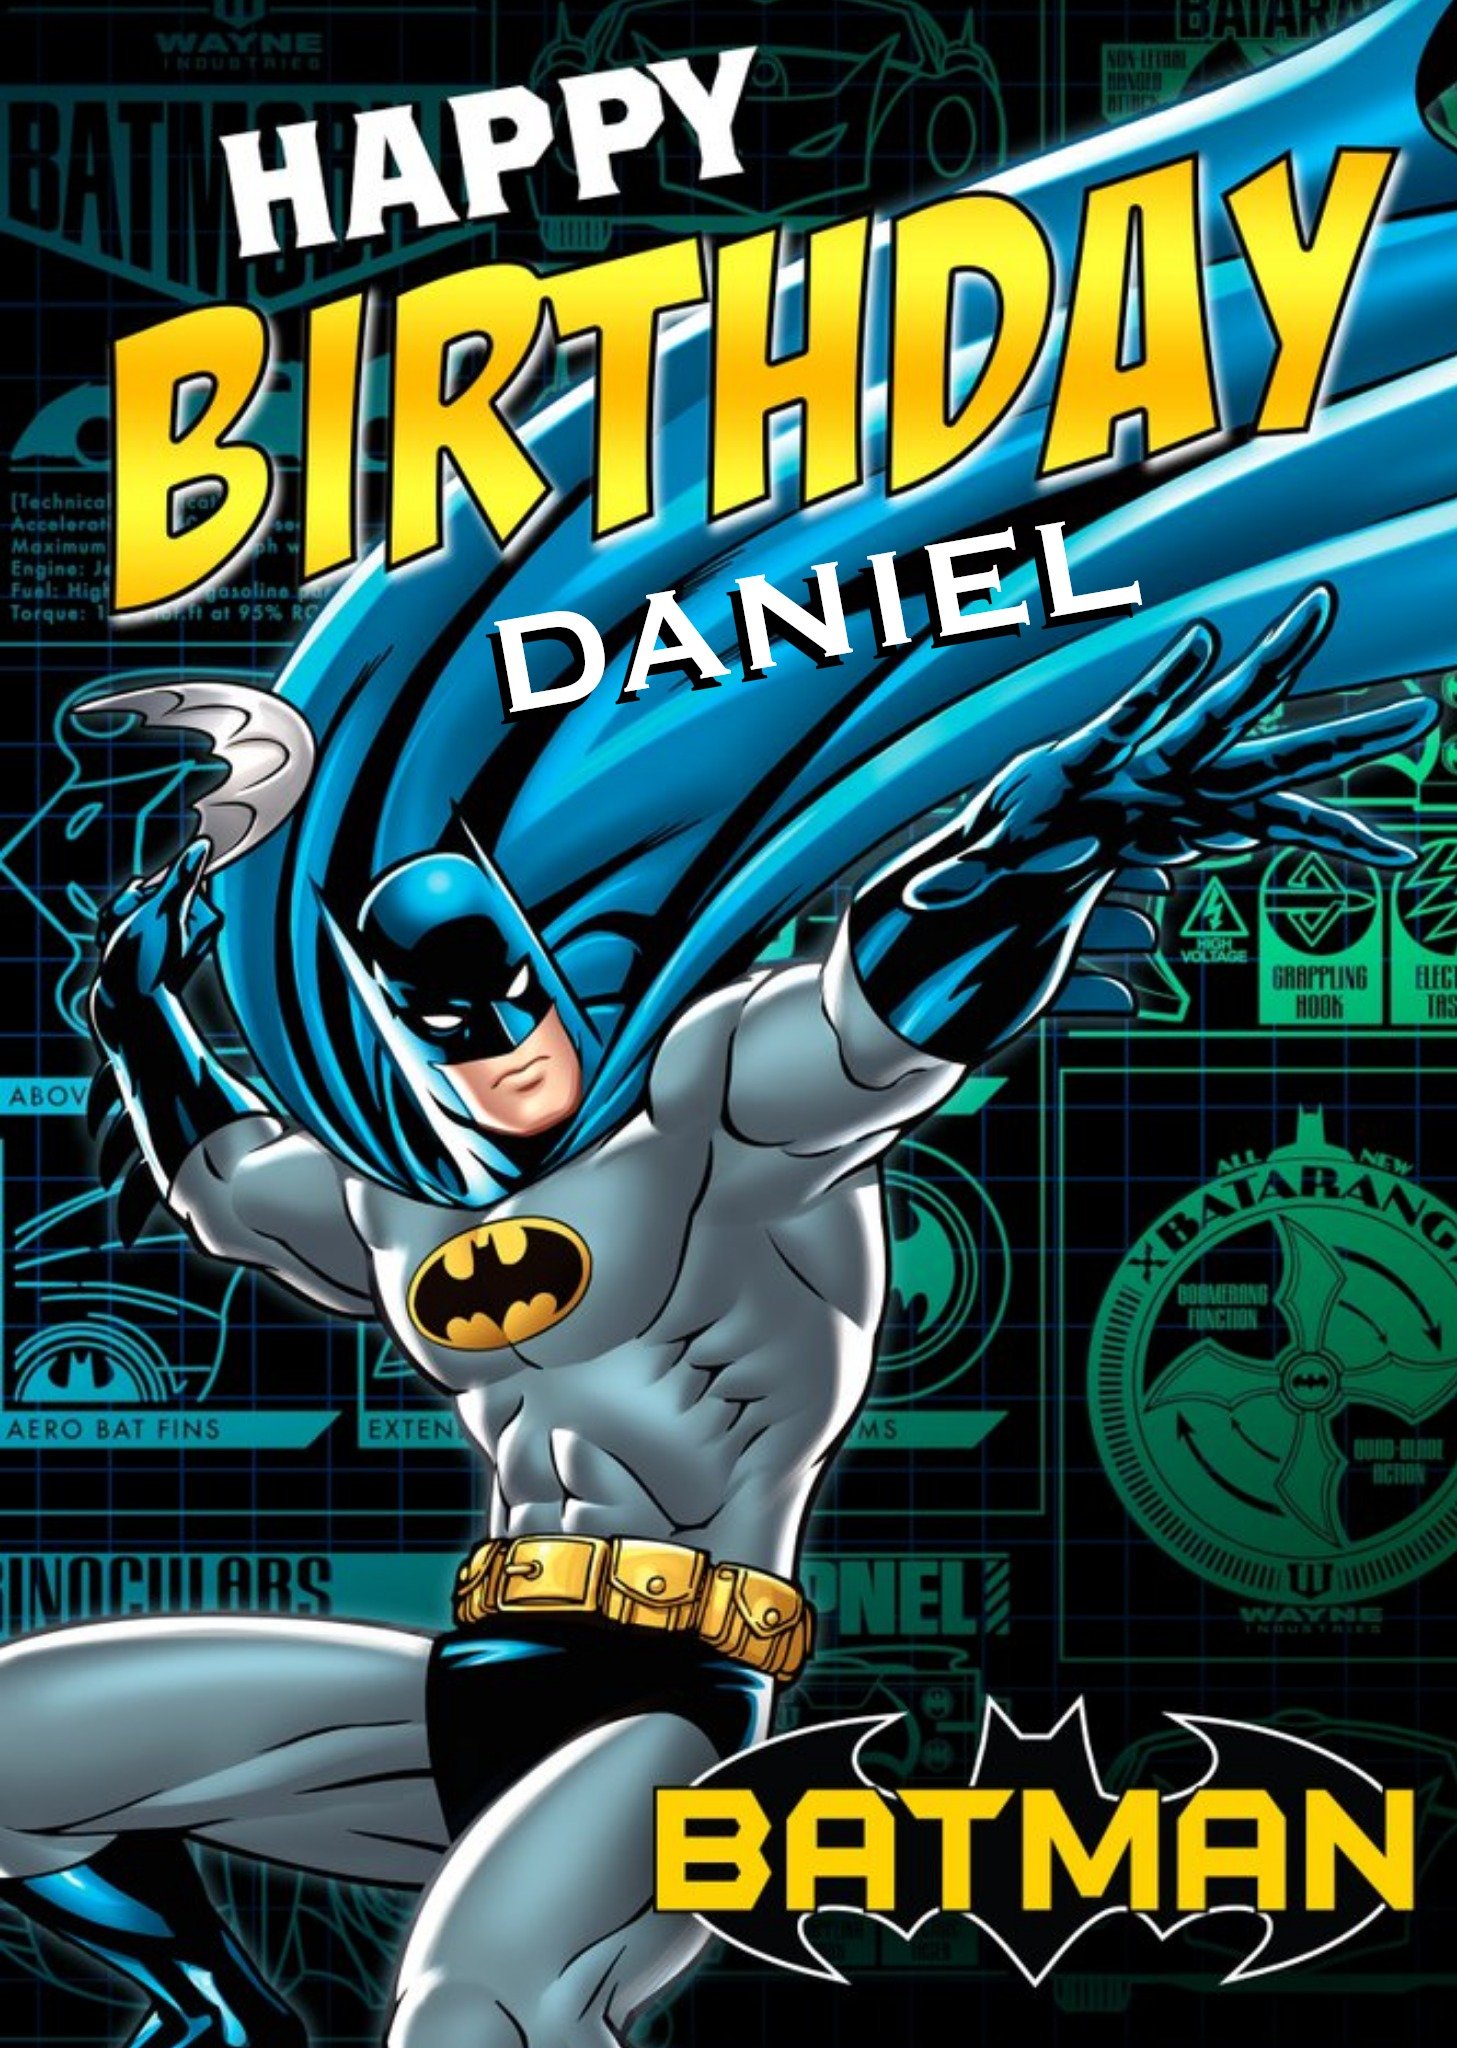 Batman In Action Personalised Happy Birthday Card, Large